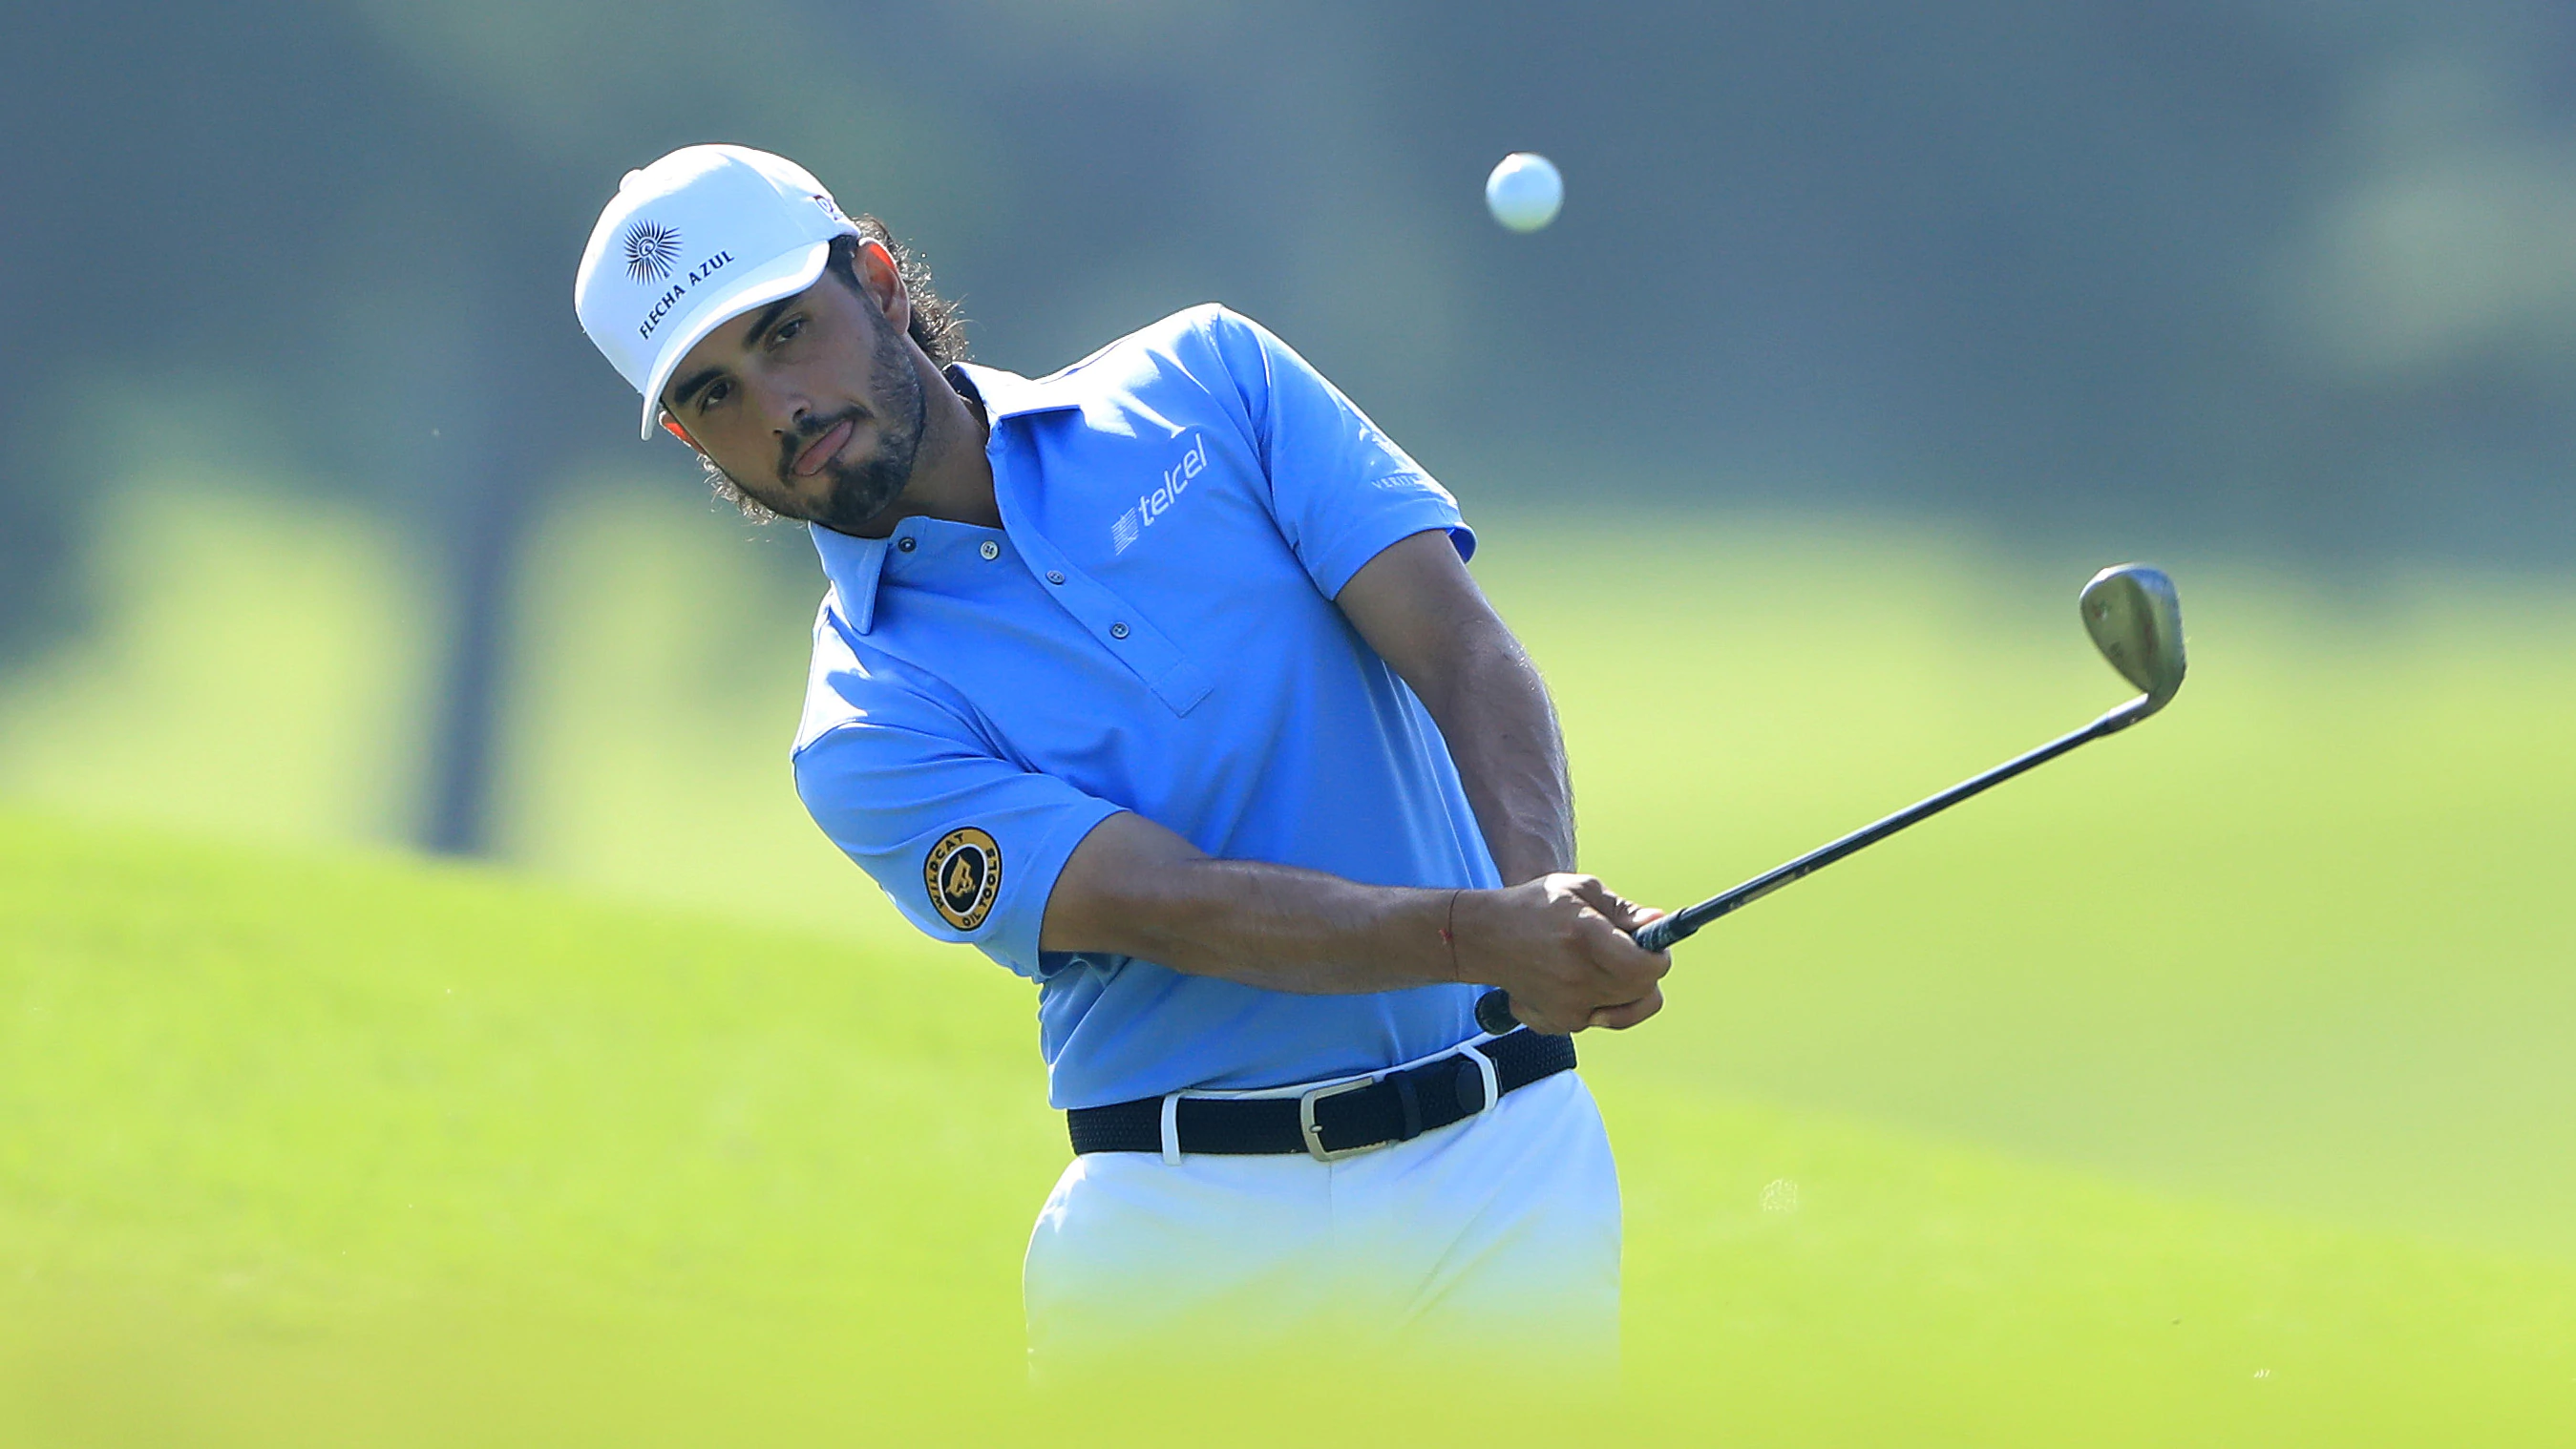 ‘Man, I had fun’: Abraham Ancer makes early move at East Lake with opening 64